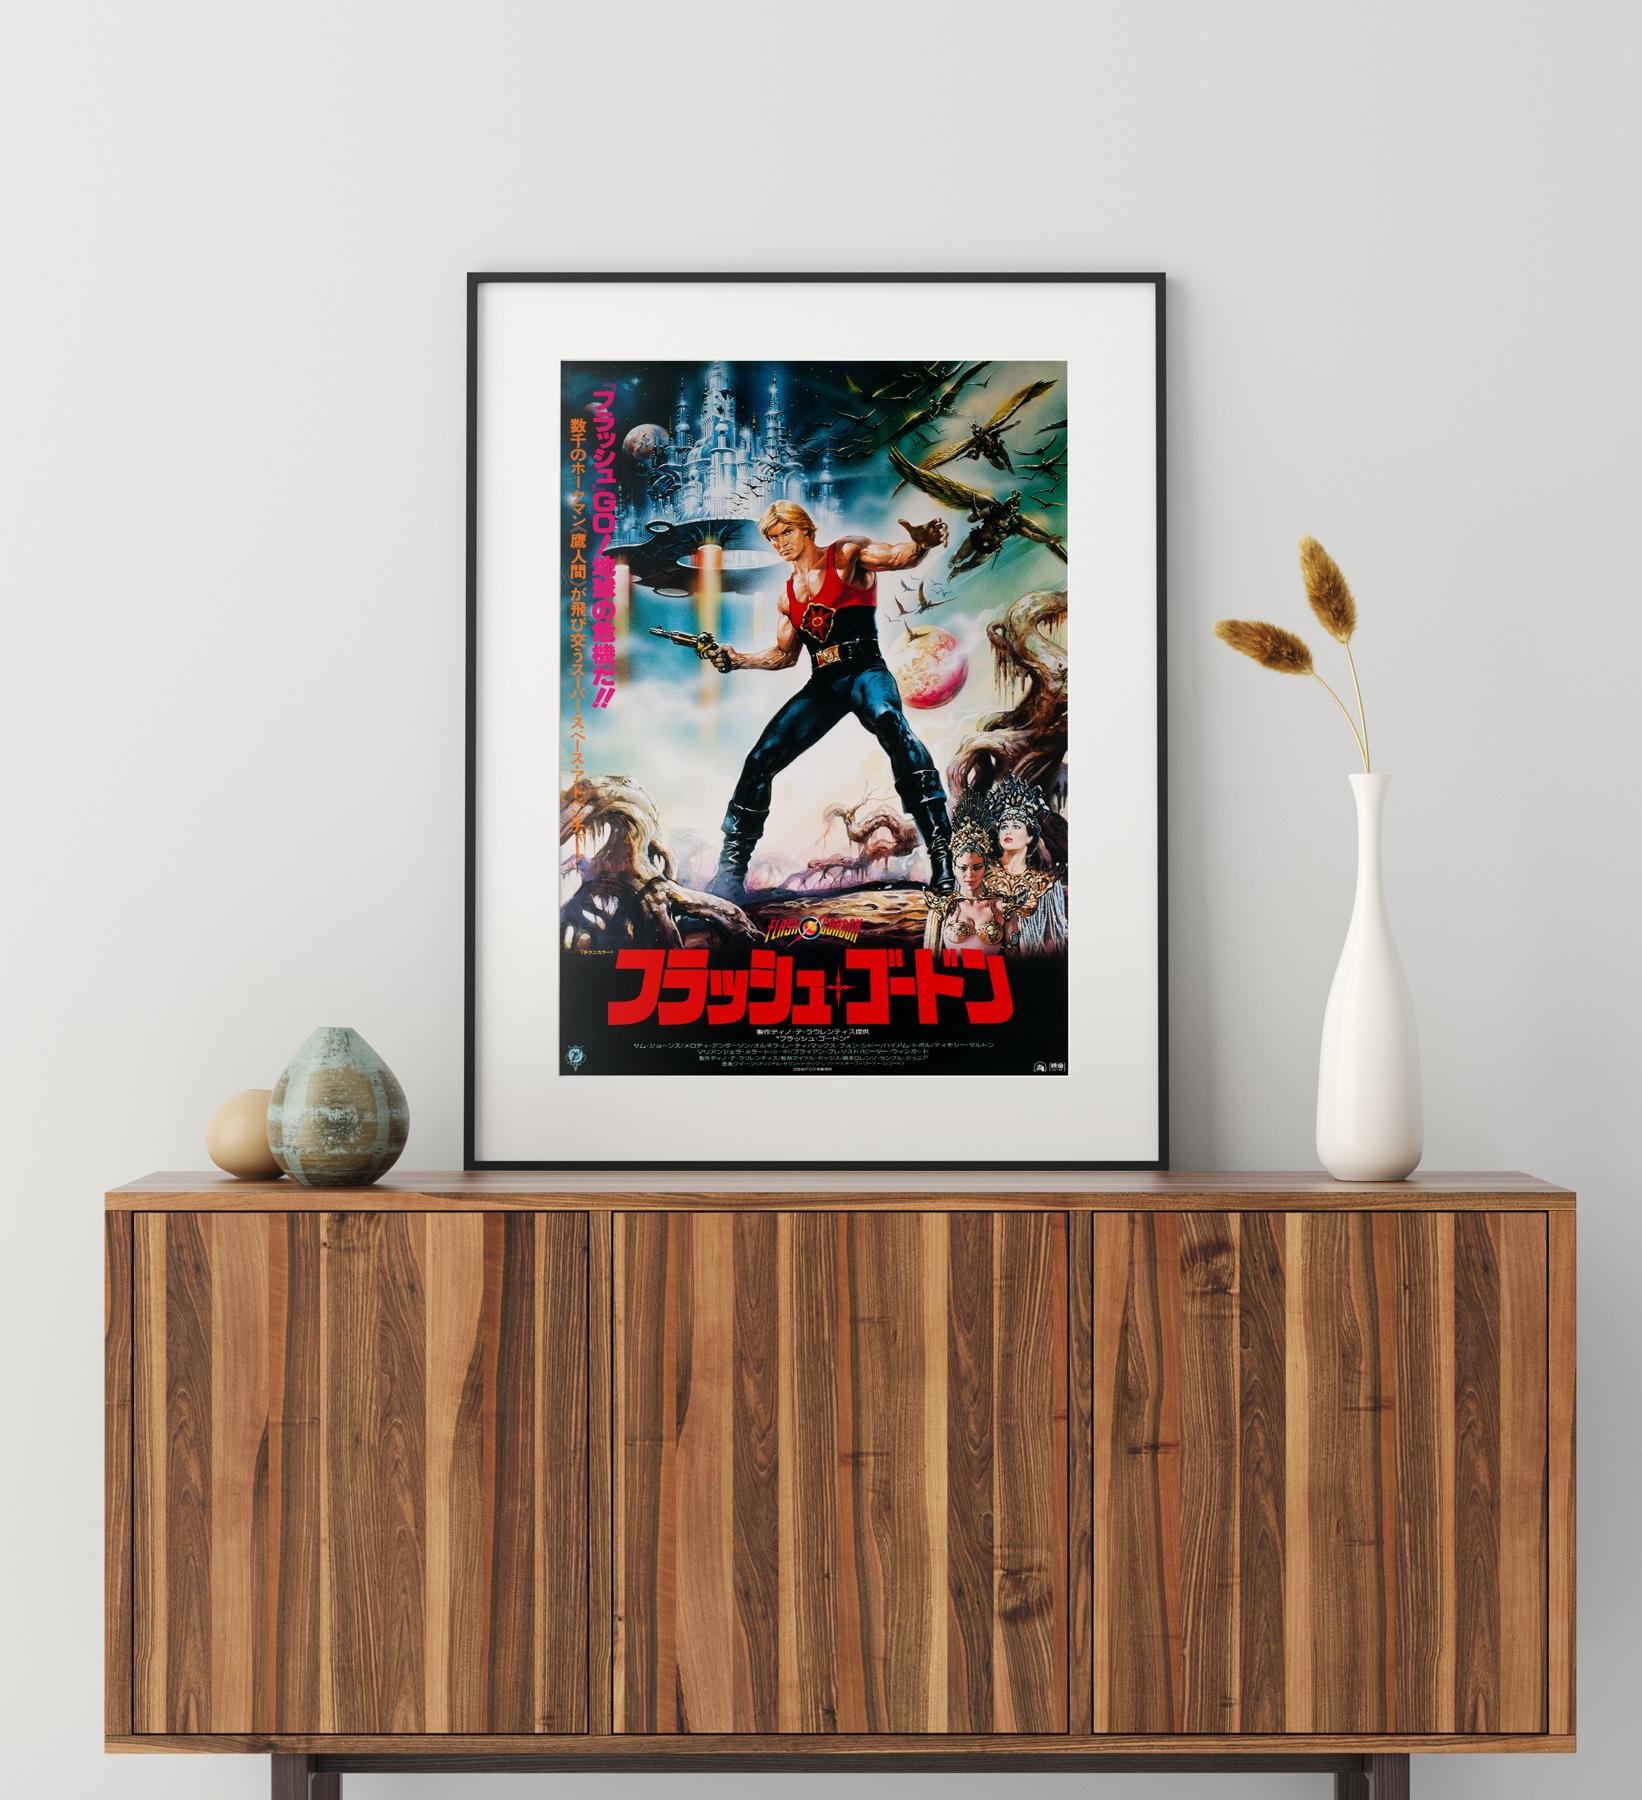 Renato Casaro's artwork looks fantastic on the Japanese original-year-of-release film poster for 80s camp comic classic Flash Gordon, a guilty pleasure for many... ourselves included.

This vintage movie poster is sized 20 1/4 x 28 5/8 inches. It